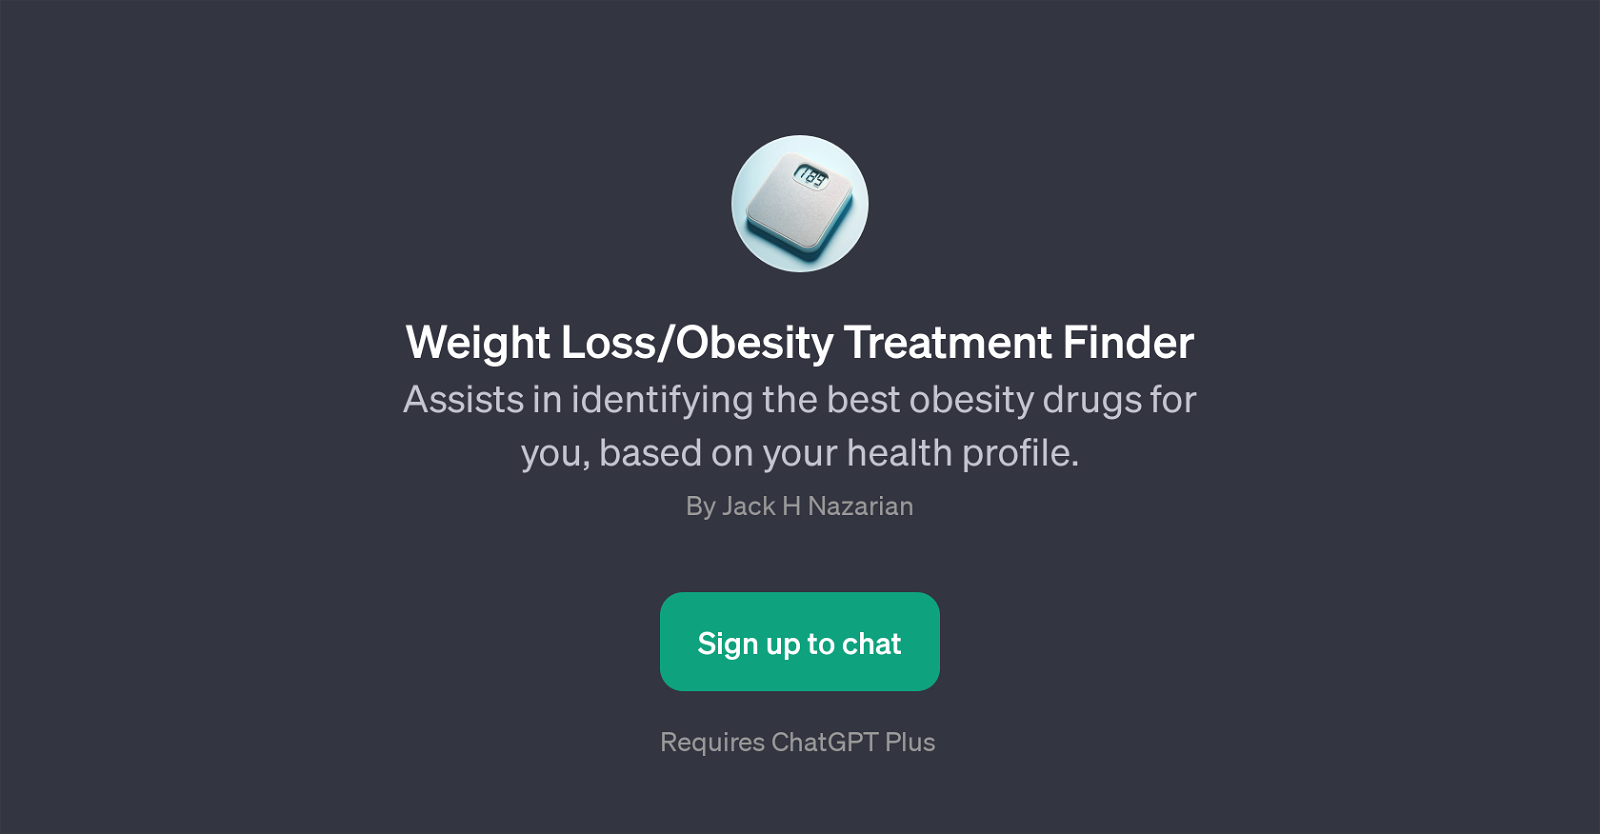 Weight Loss/Obesity Treatment Finder website